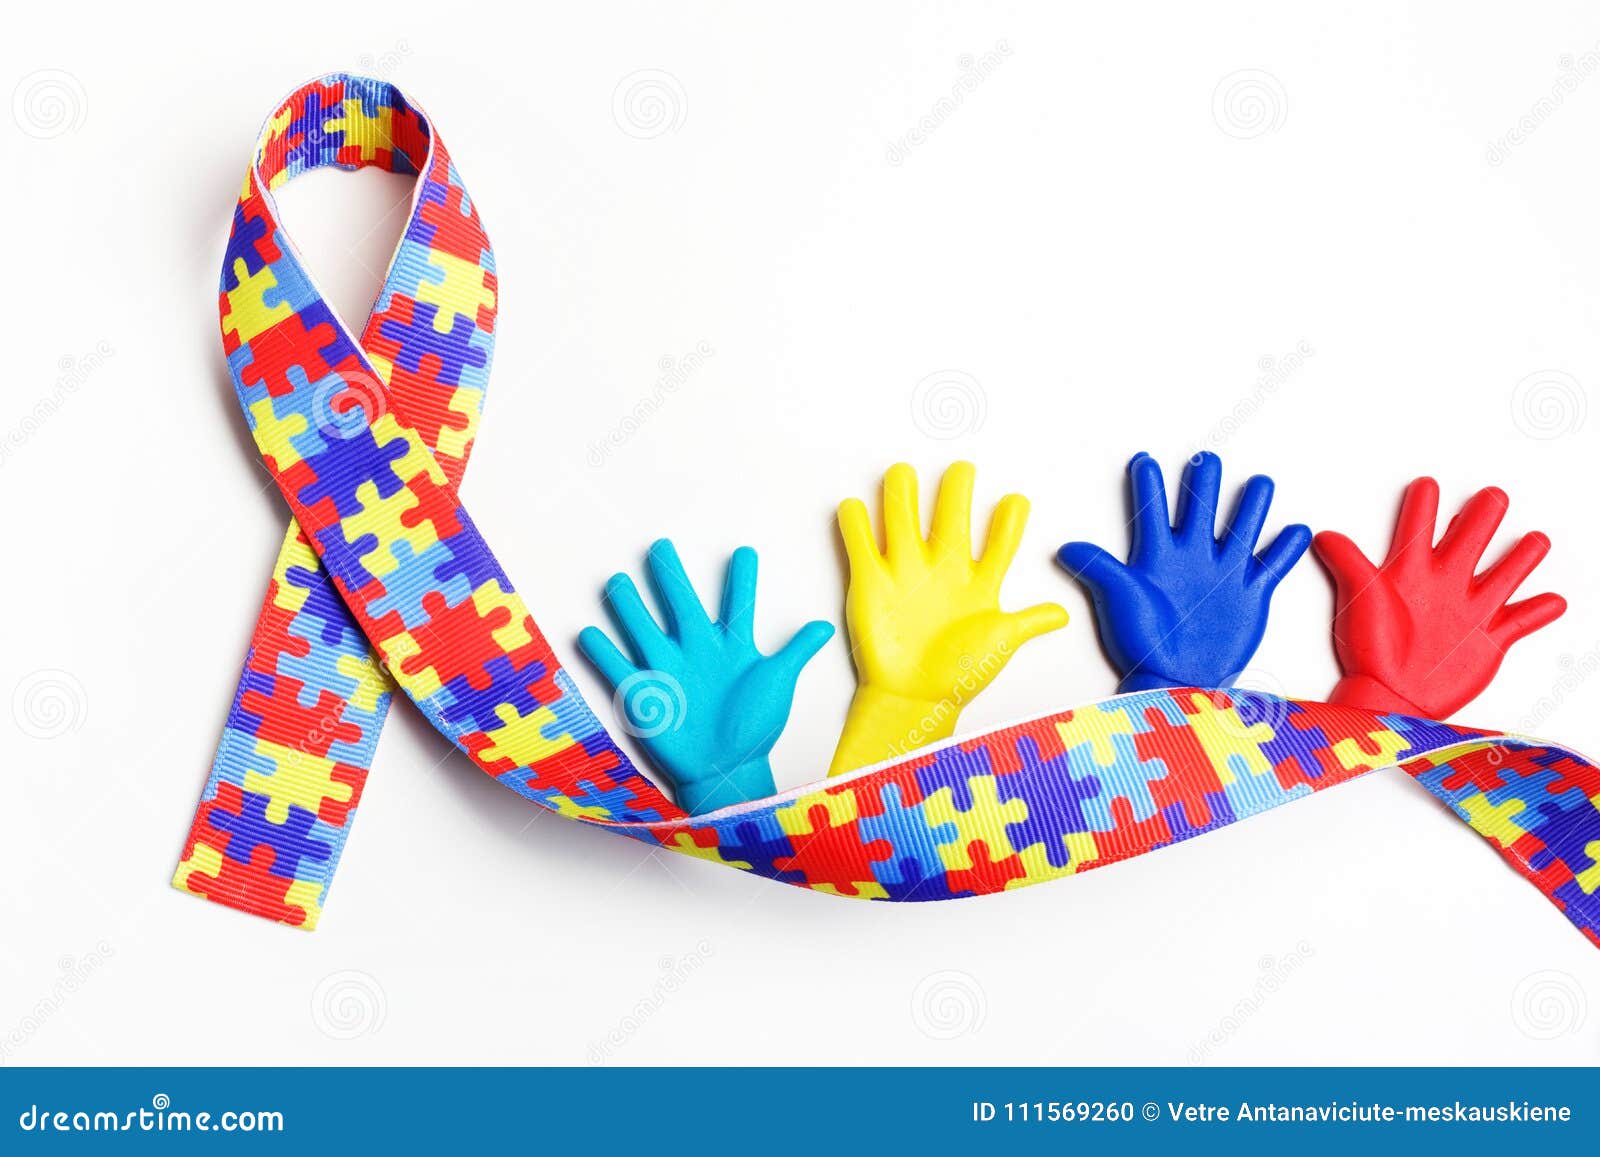 autism awareness concept with colorful hands on white background. top view